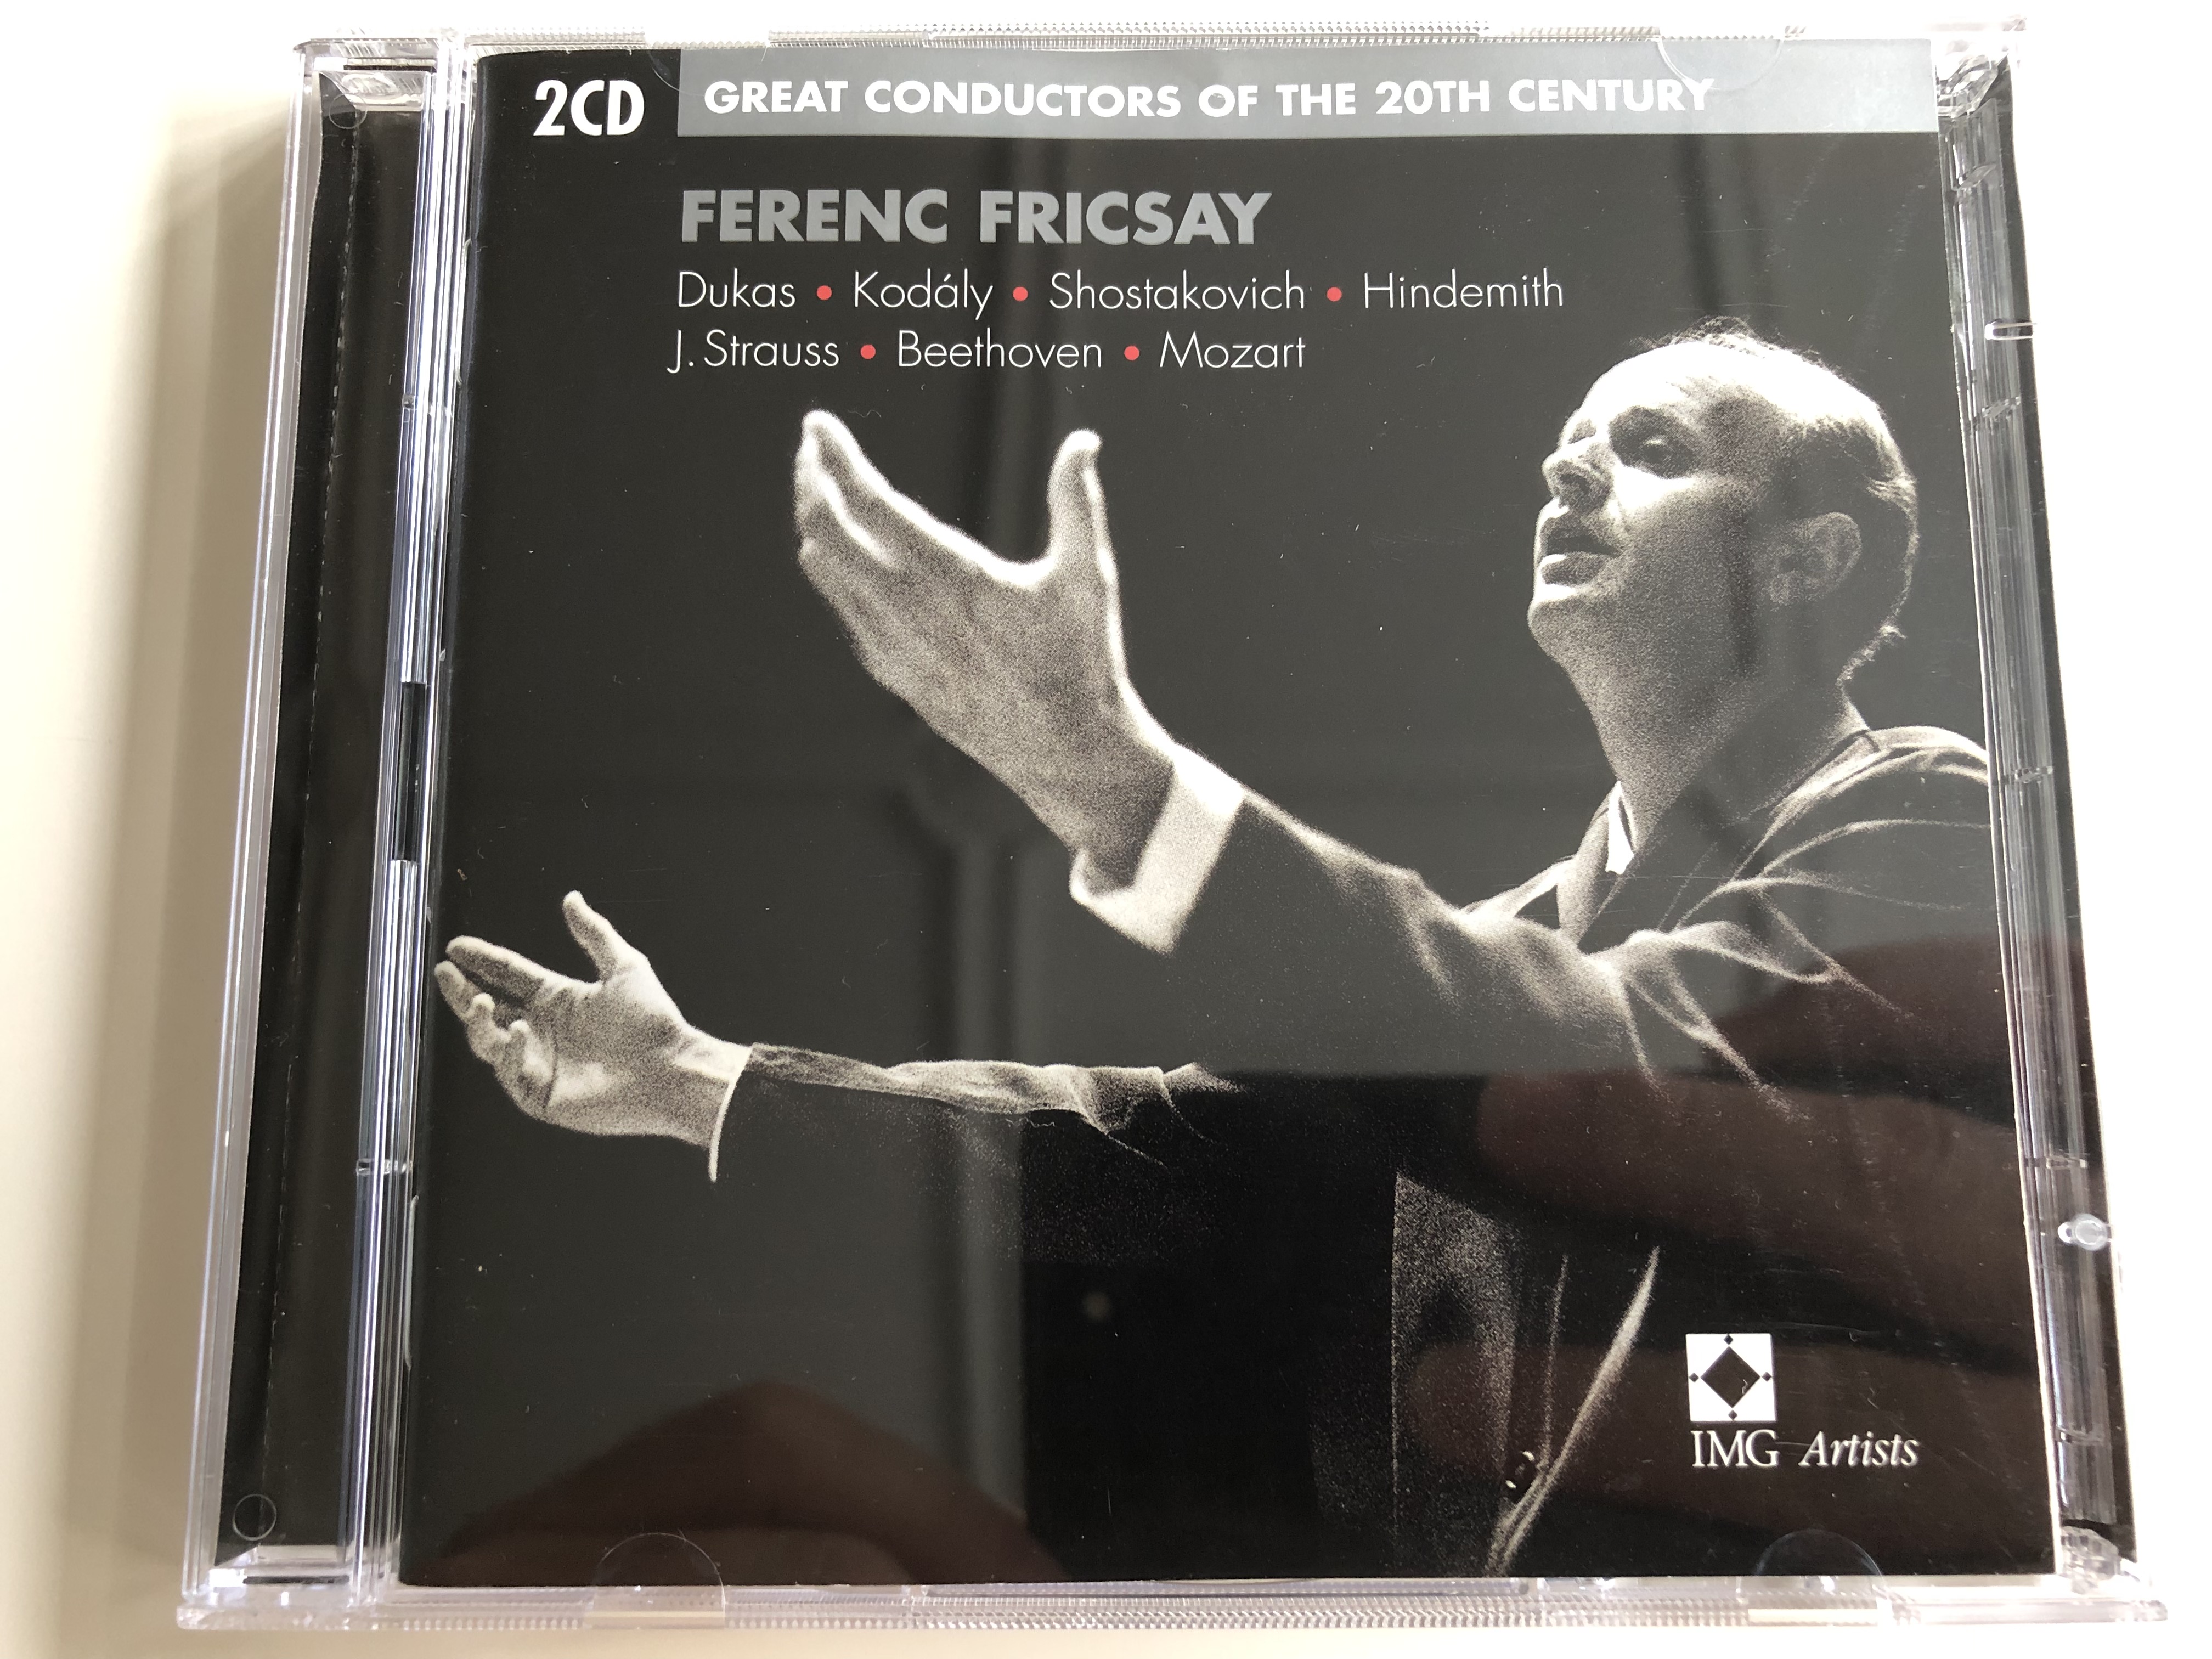 ferenc-fricsay-great-conductors-of-the-20th-century-dukas-kod-ly-shostakovich-hindemith-j.-strauss-beethoven-mozart-2cd-2-.jpg